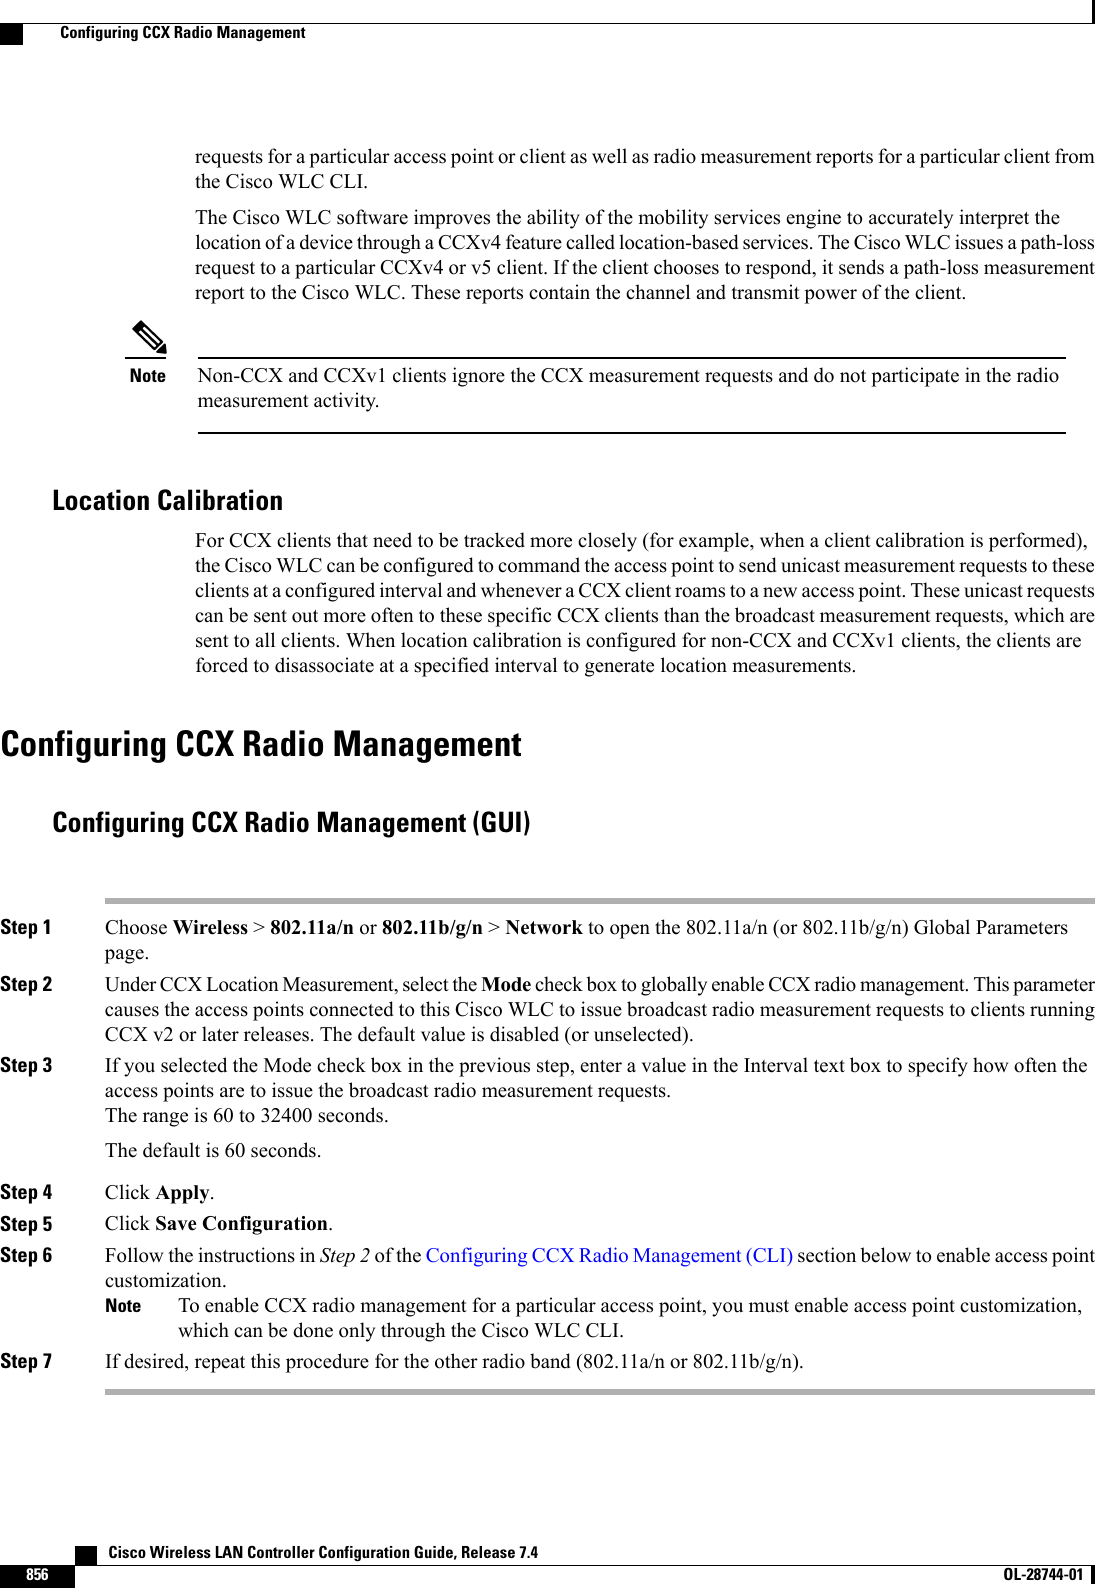 requests for a particular access point or client as well as radio measurement reports for a particular client fromthe Cisco WLC CLI.The Cisco WLC software improves the ability of the mobility services engine to accurately interpret thelocation of a device through a CCXv4 feature called location-based services. The Cisco WLC issues a path-lossrequest to a particular CCXv4 or v5 client. If the client chooses to respond, it sends a path-loss measurementreport to the Cisco WLC. These reports contain the channel and transmit power of the client.Non-CCX and CCXv1 clients ignore the CCX measurement requests and do not participate in the radiomeasurement activity.NoteLocation CalibrationFor CCX clients that need to be tracked more closely (for example, when a client calibration is performed),the Cisco WLC can be configured to command the access point to send unicast measurement requests to theseclients at a configured interval and whenever a CCX client roams to a new access point. These unicast requestscan be sent out more often to these specific CCX clients than the broadcast measurement requests, which aresent to all clients. When location calibration is configured for non-CCX and CCXv1 clients, the clients areforced to disassociate at a specified interval to generate location measurements.Configuring CCX Radio ManagementConfiguring CCX Radio Management (GUI)Step 1 Choose Wireless &gt;802.11a/n or 802.11b/g/n &gt;Network to open the 802.11a/n (or 802.11b/g/n) Global Parameterspage.Step 2 Under CCX Location Measurement, select the Mode check box to globally enable CCX radio management. This parametercauses the access points connected to this Cisco WLC to issue broadcast radio measurement requests to clients runningCCX v2 or later releases. The default value is disabled (or unselected).Step 3 If you selected the Mode check box in the previous step, enter a value in the Interval text box to specify how often theaccess points are to issue the broadcast radio measurement requests.The range is 60 to 32400 seconds.The default is 60 seconds.Step 4 Click Apply.Step 5 Click Save Configuration.Step 6 Follow the instructions in Step 2 of the Configuring CCX Radio Management (CLI) section below to enable access pointcustomization.To enable CCX radio management for a particular access point, you must enable access point customization,which can be done only through the Cisco WLC CLI.NoteStep 7 If desired, repeat this procedure for the other radio band (802.11a/n or 802.11b/g/n).   Cisco Wireless LAN Controller Configuration Guide, Release 7.4856 OL-28744-01  Configuring CCX Radio Management